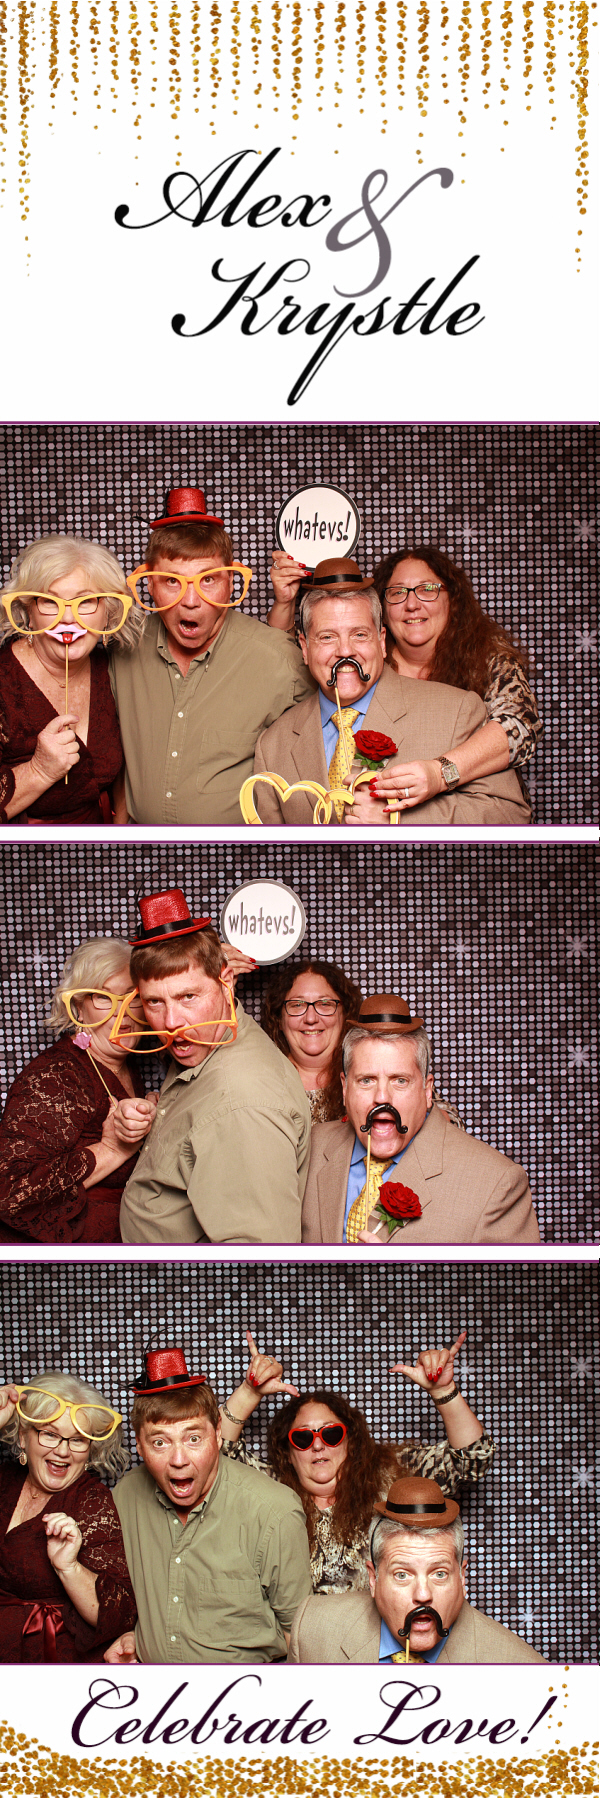 2x6 photo strip of group with props posing in front of silver shimmer backdrop